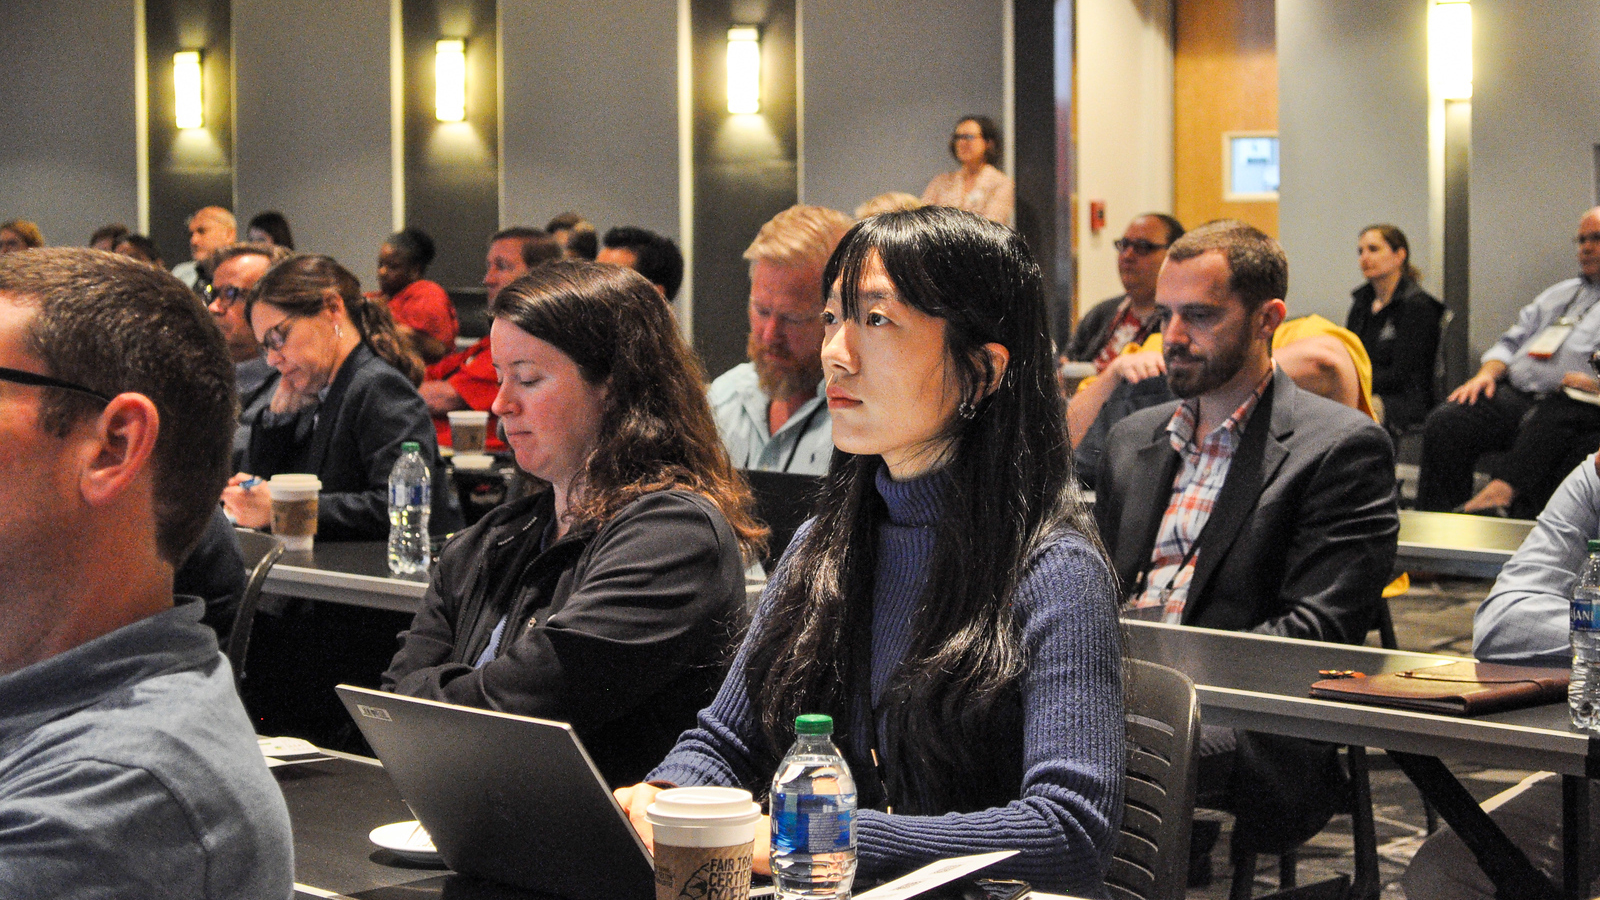 People listen to a presentation at the 2023 Developing Data Analytics Capabilities Conference. Conference attendees have the opportunity to connect with experts in the field, identify their organizations’ data readiness, and consider next steps for increasing data analytics capabilities.